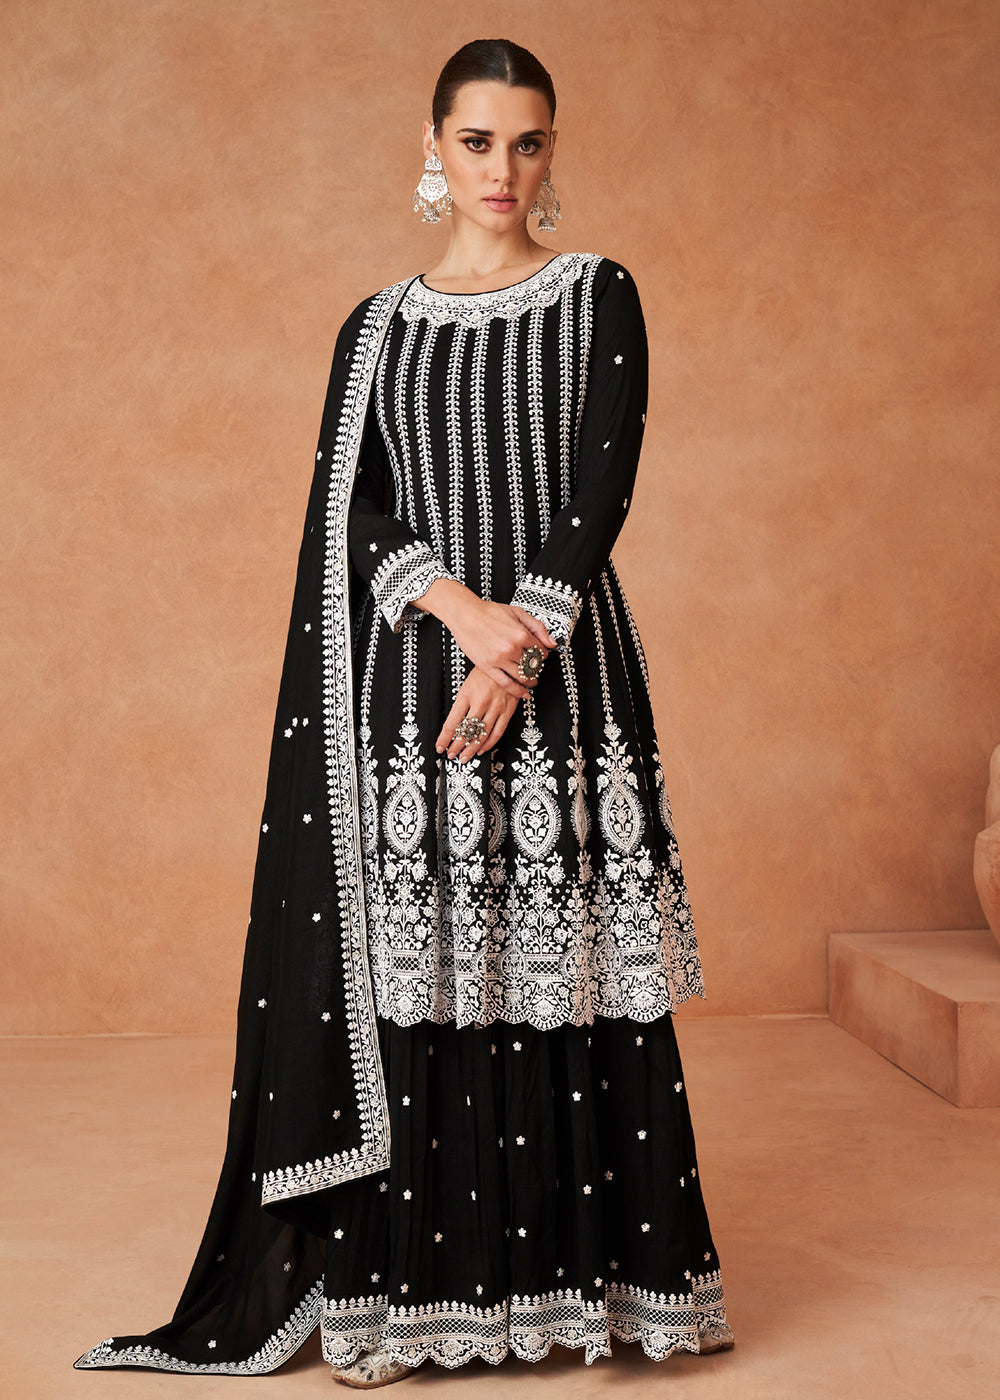 Shop Now Premium Silk Embroidered Black Festive Sharara Suit Online at Empress Clothing in USA, UK, Canada, Italy & Worldwide.